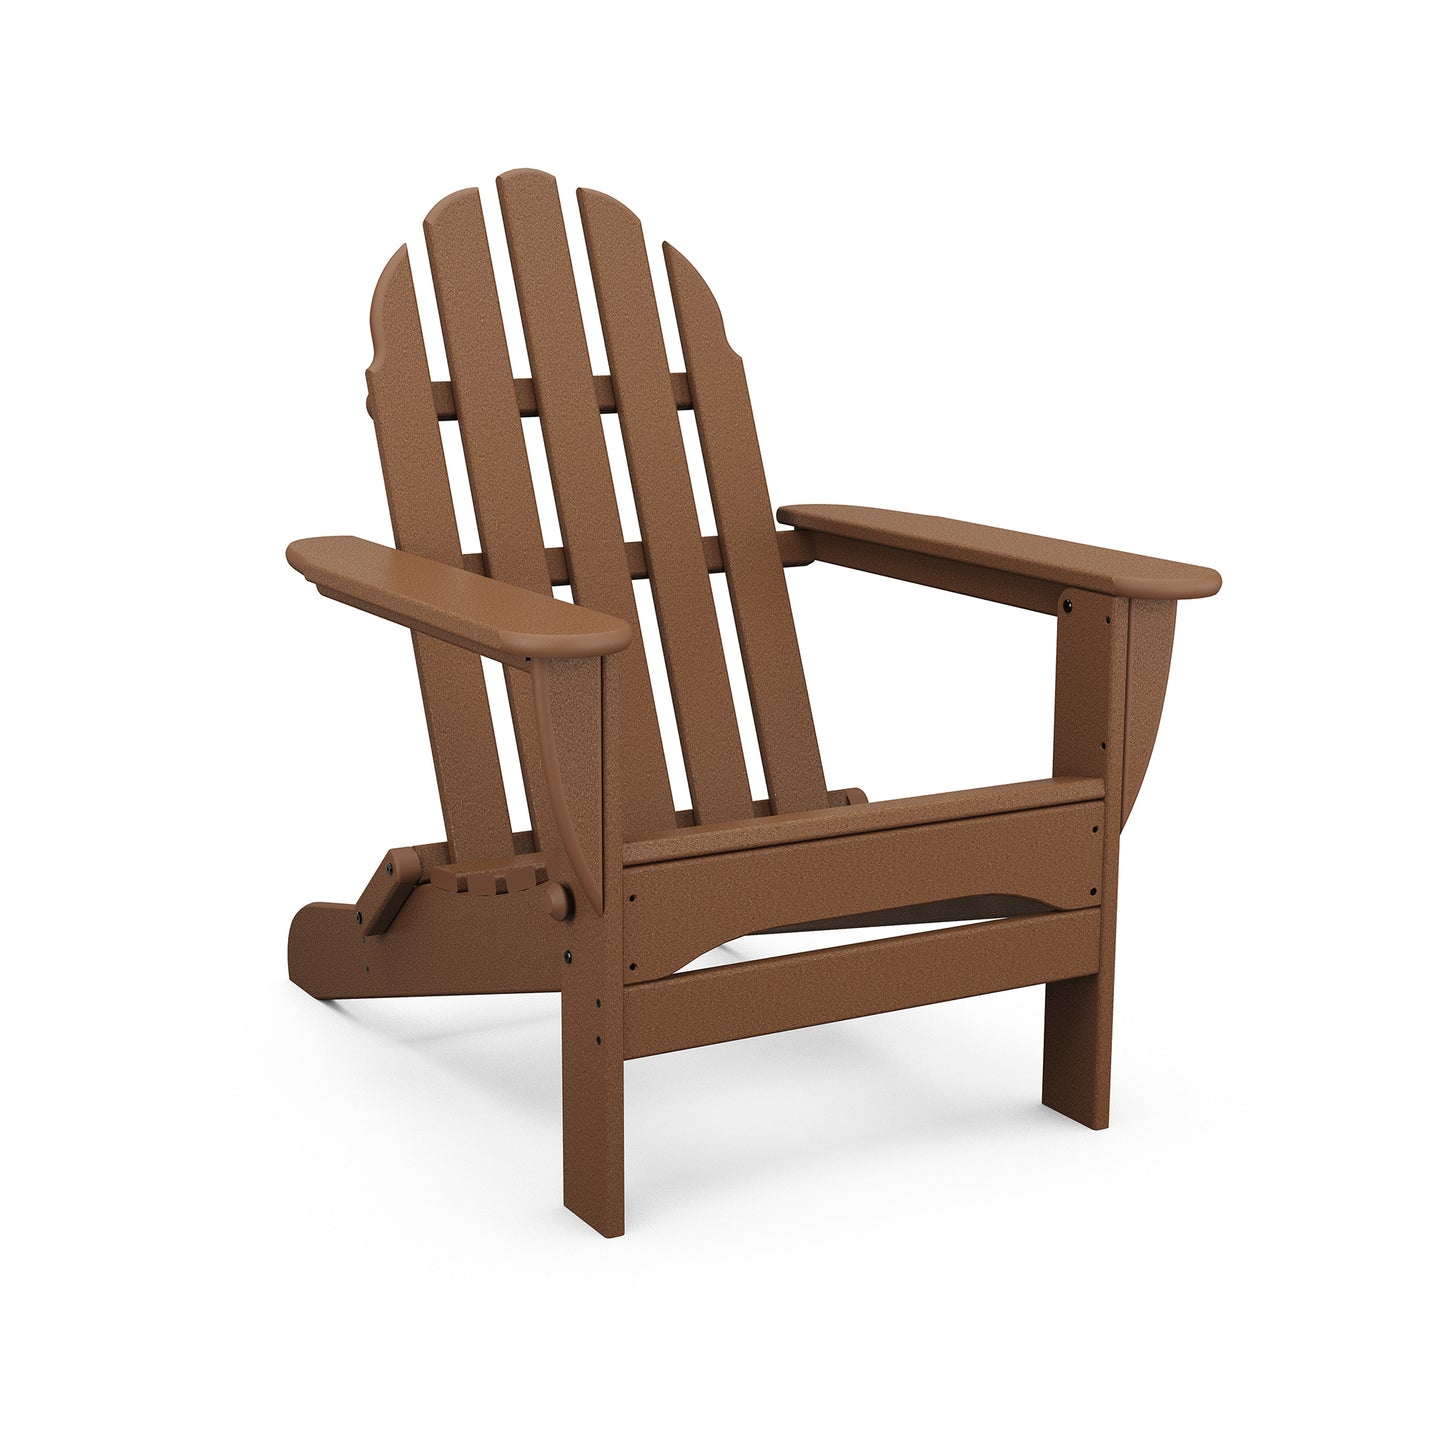 A single brown POLYWOOD Classic Folding Adirondack chair, featuring a high slatted back and broad armrests, displayed on a plain white background.